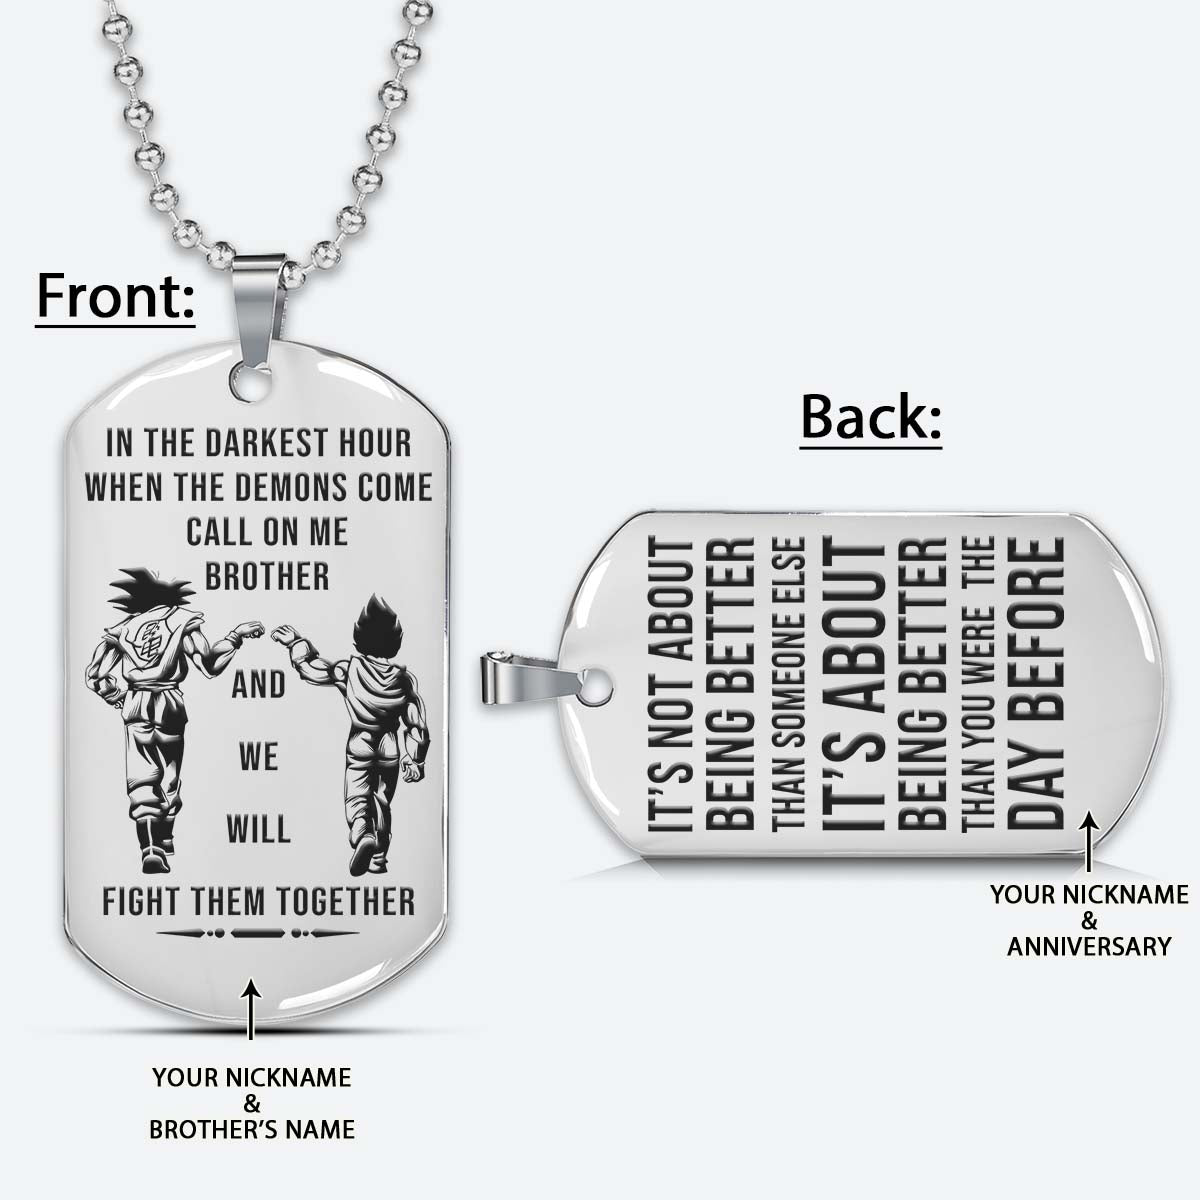 DRD054 - Call On Me Brother - It's About Being Better Than You Were The Day Before - Goku - Vegeta - Dragon Ball Dog Tag - Silver Double-Sided Engrave Dog Tag